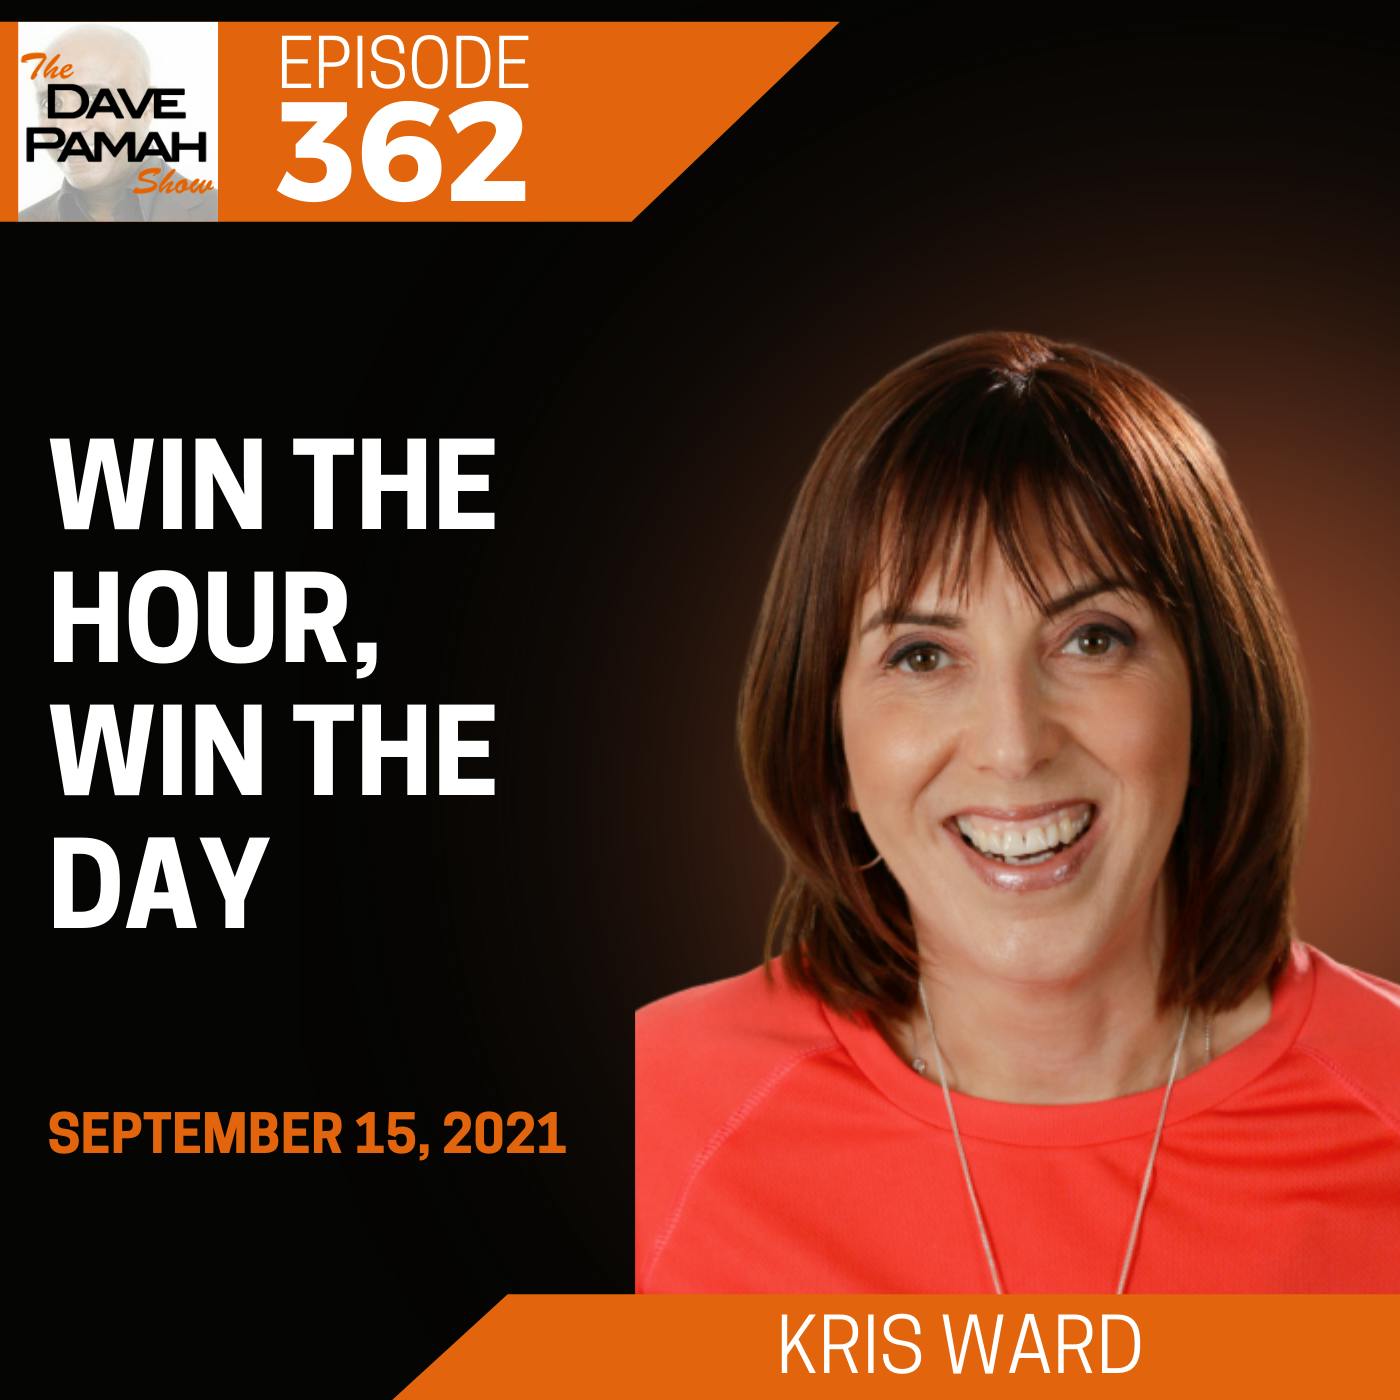 Win The Hour, Win the Day with Kris Ward